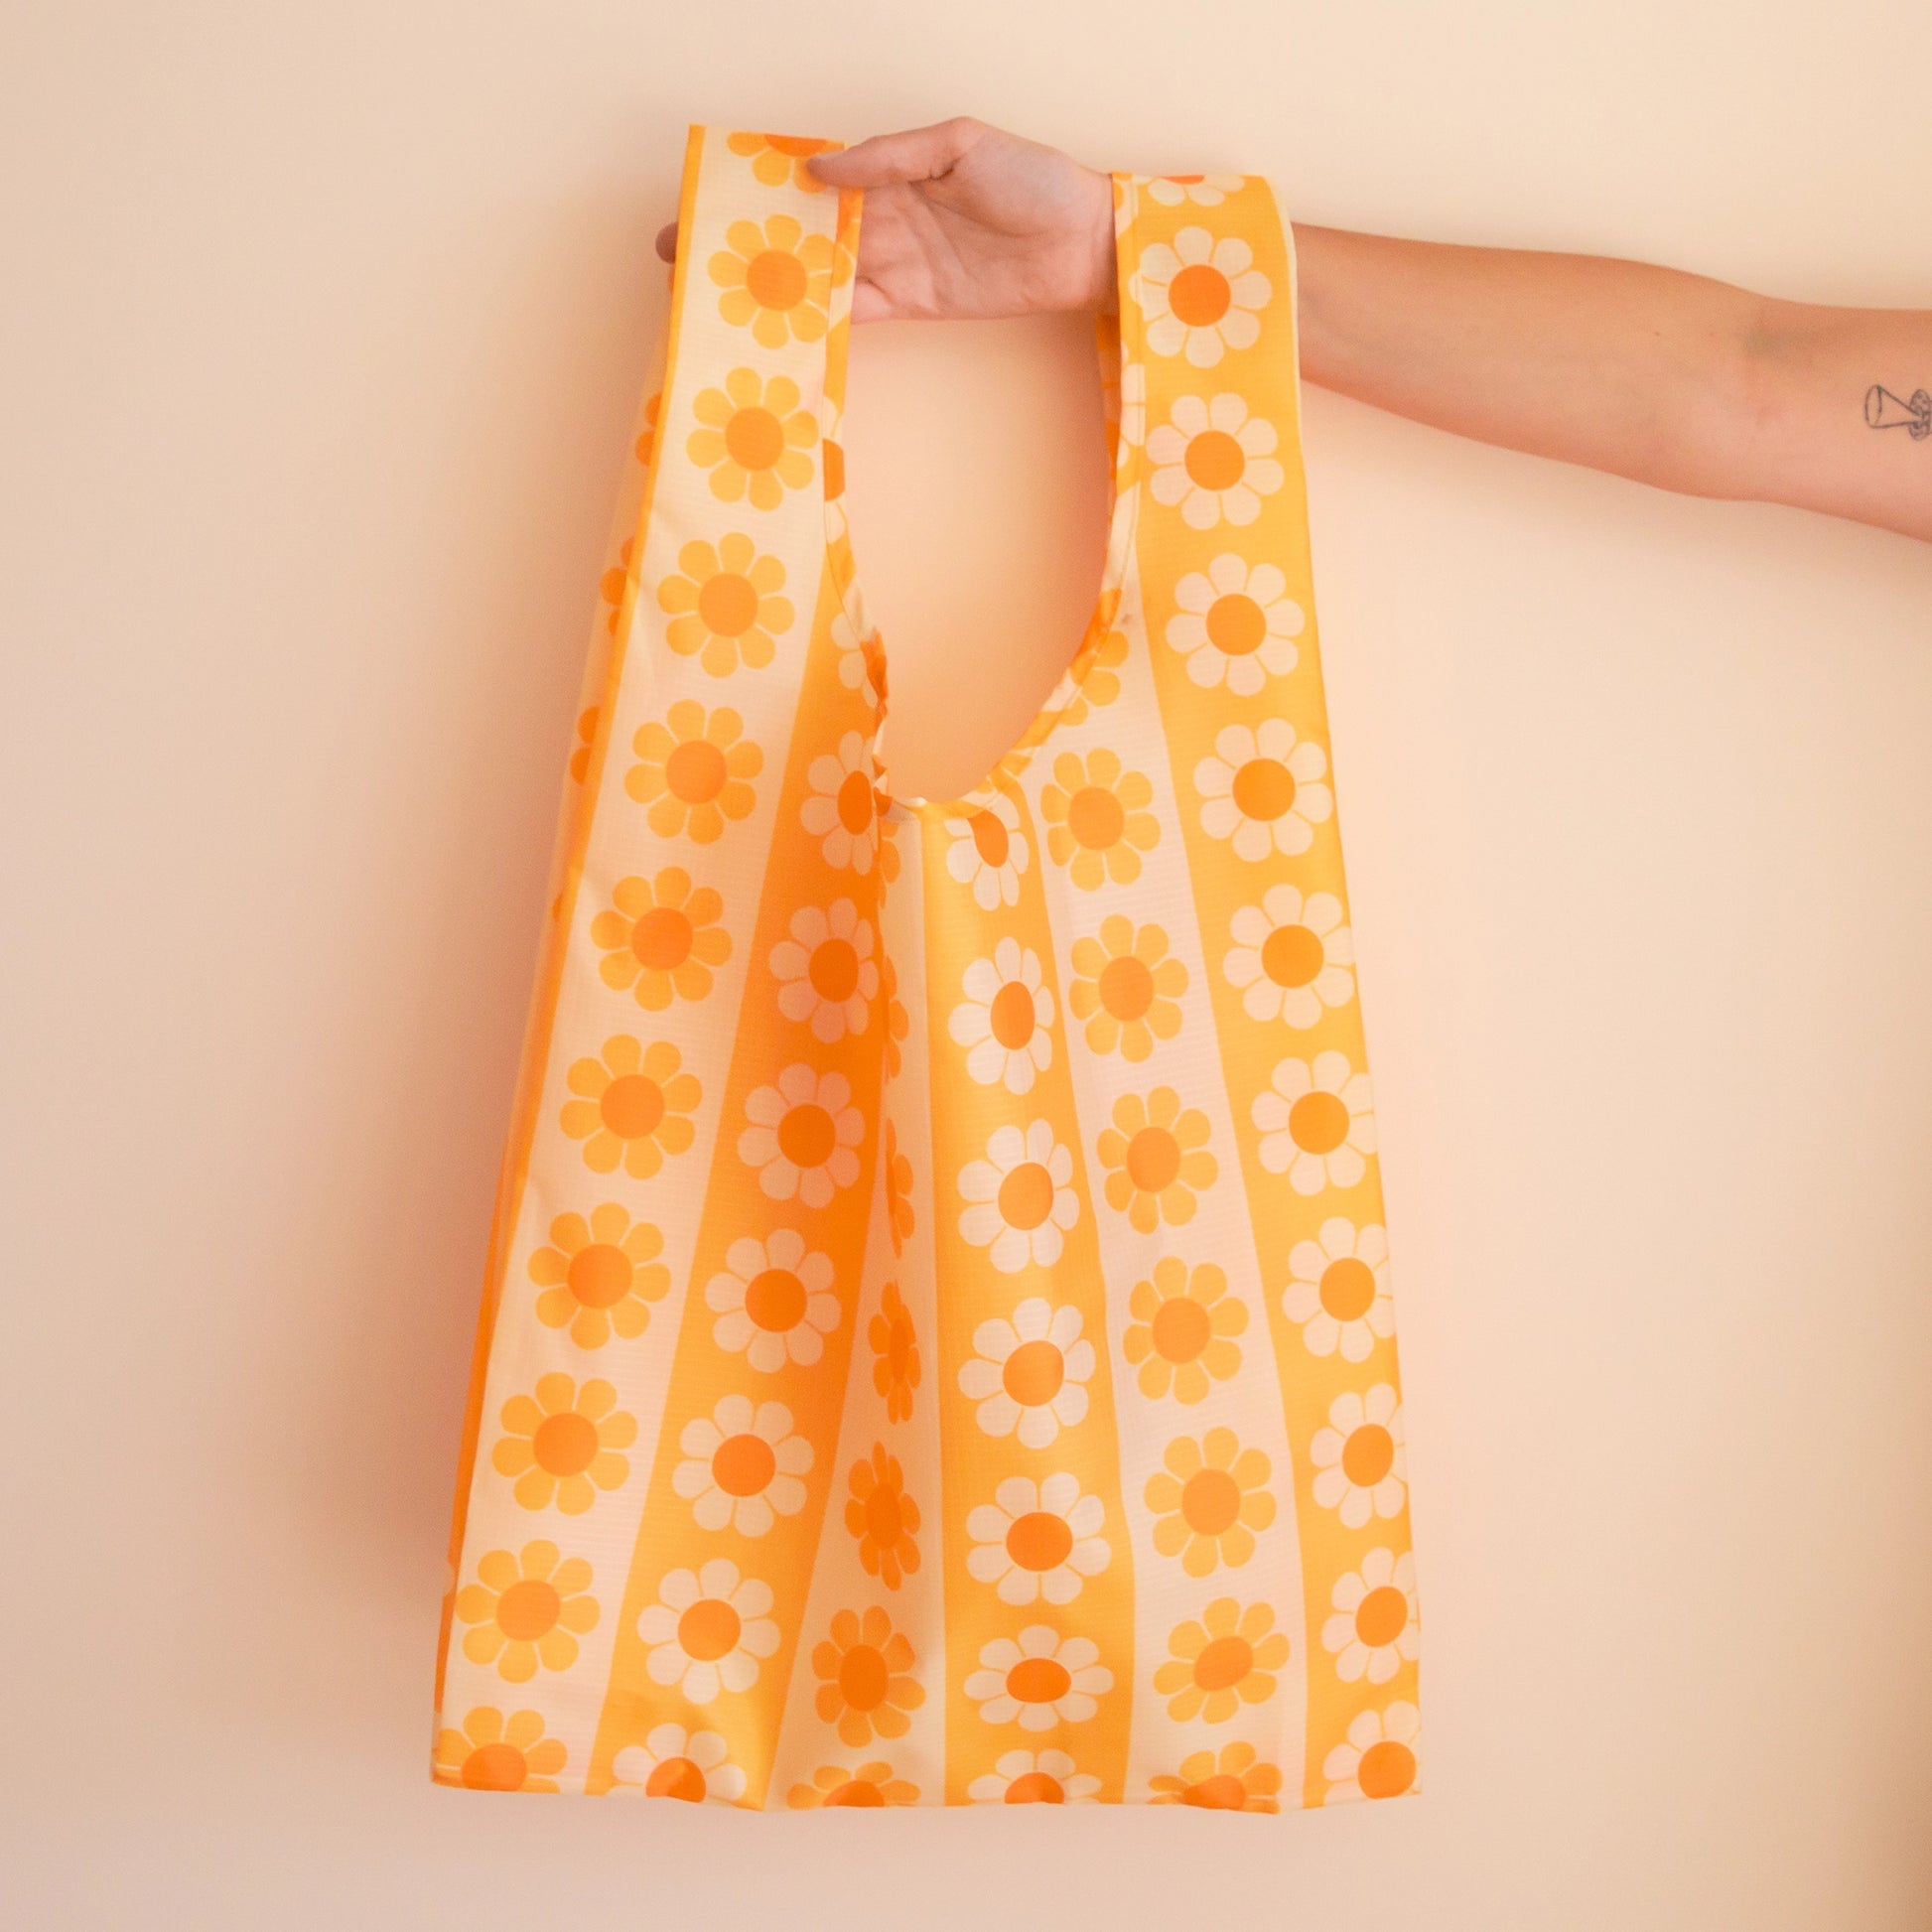 On a tan background if a model's hand holding out a reusable nylon bag with a yellow and orange daisy pattern.  